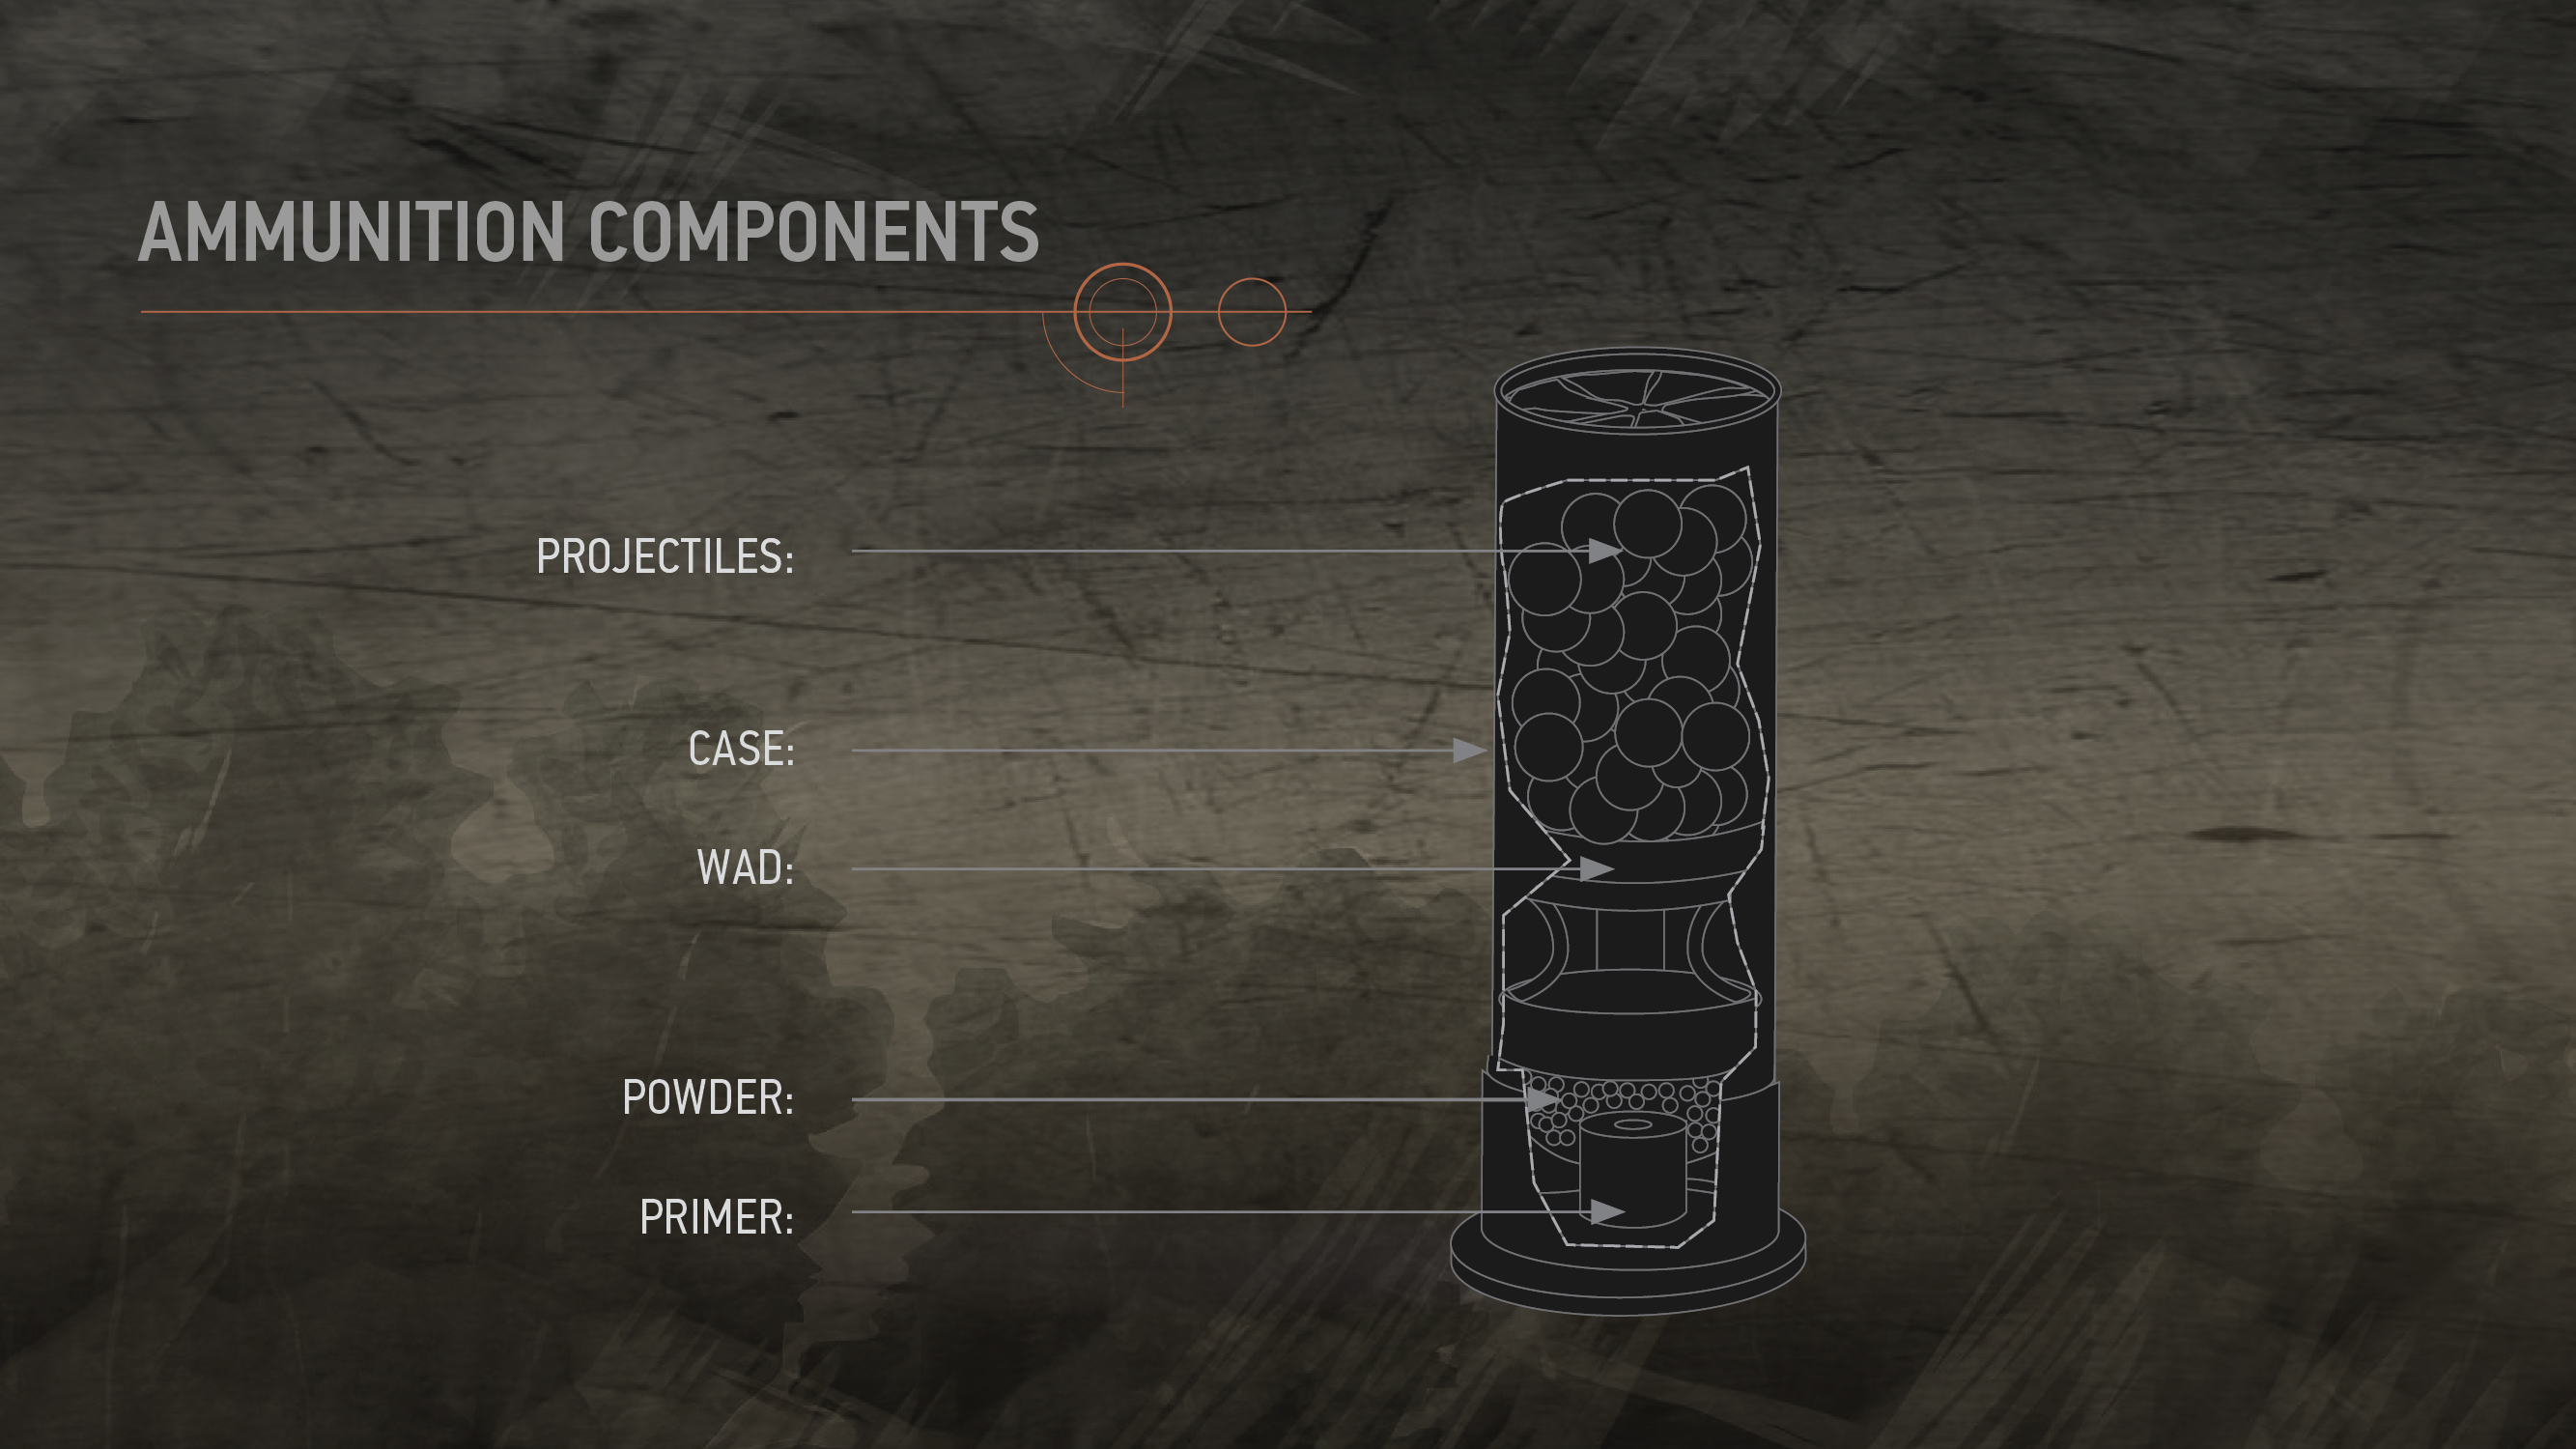 Illustration showing the inner components of cartridge and shotshell ammunition. Components identified include projectiles, cases, powder, primer and wad (shotshells only).